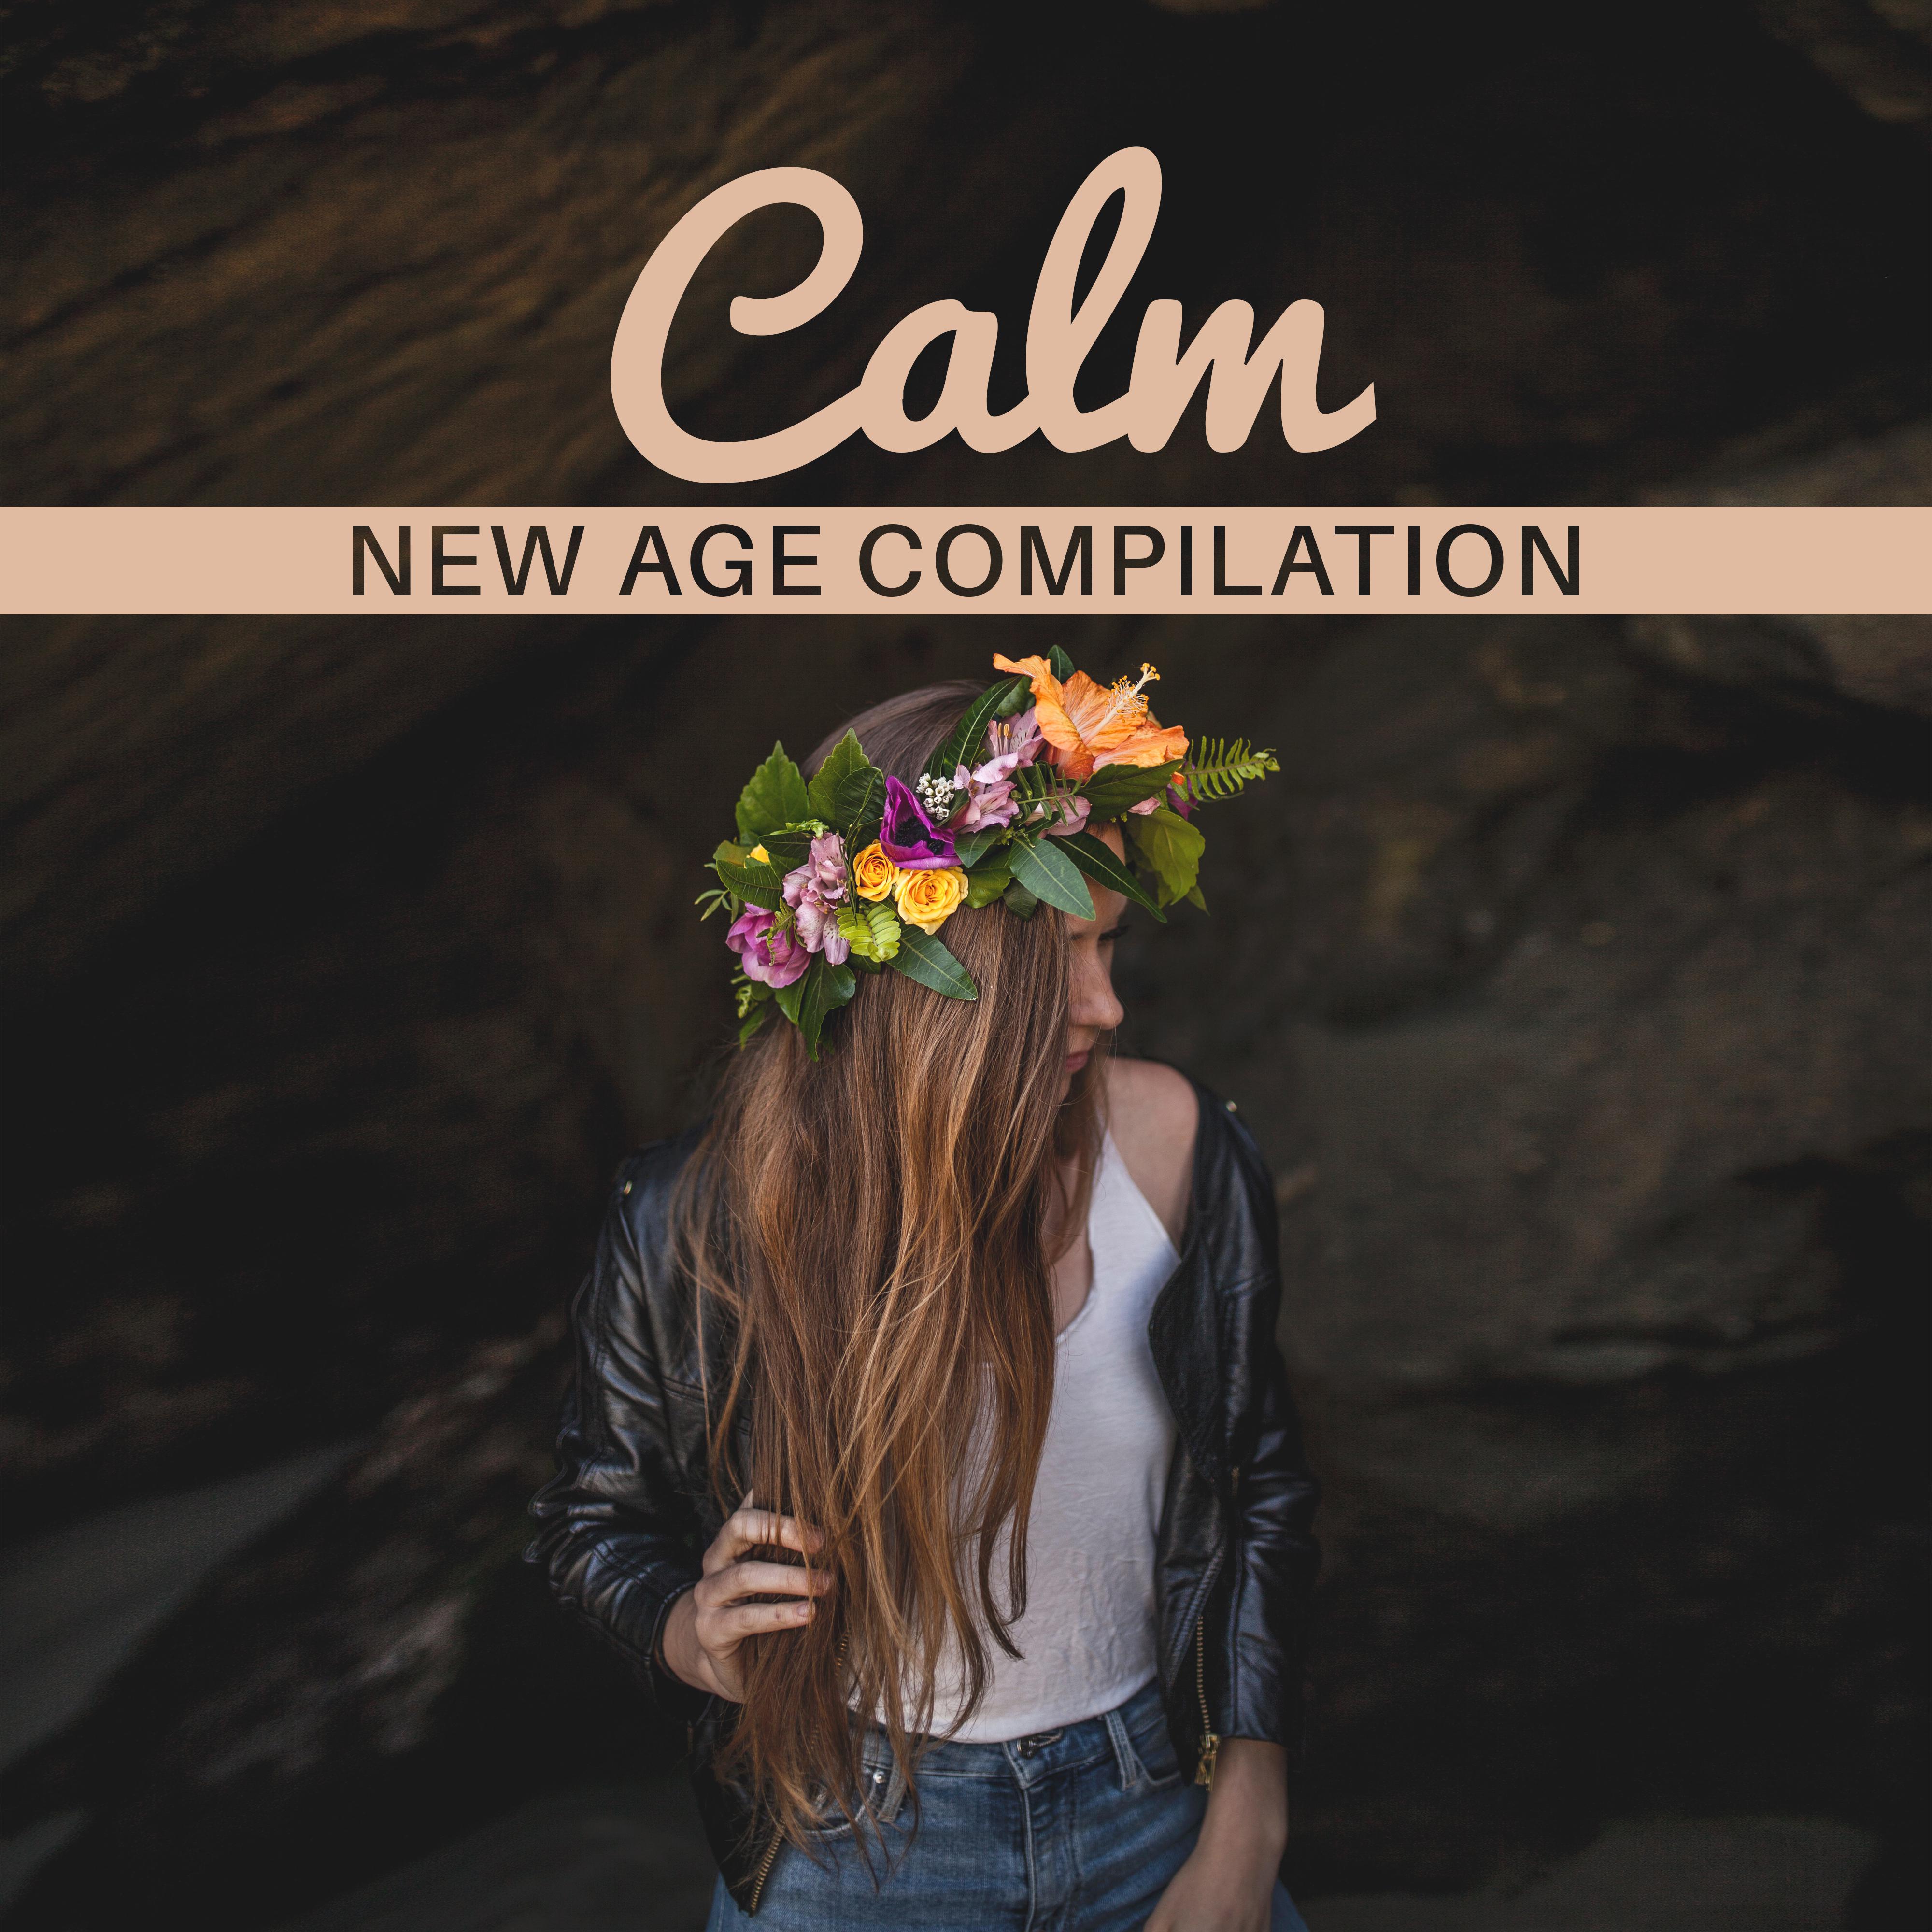 Calm New Age Compilation  Relaxing Music Therapy, Sounds of Nature, Healing Melodies